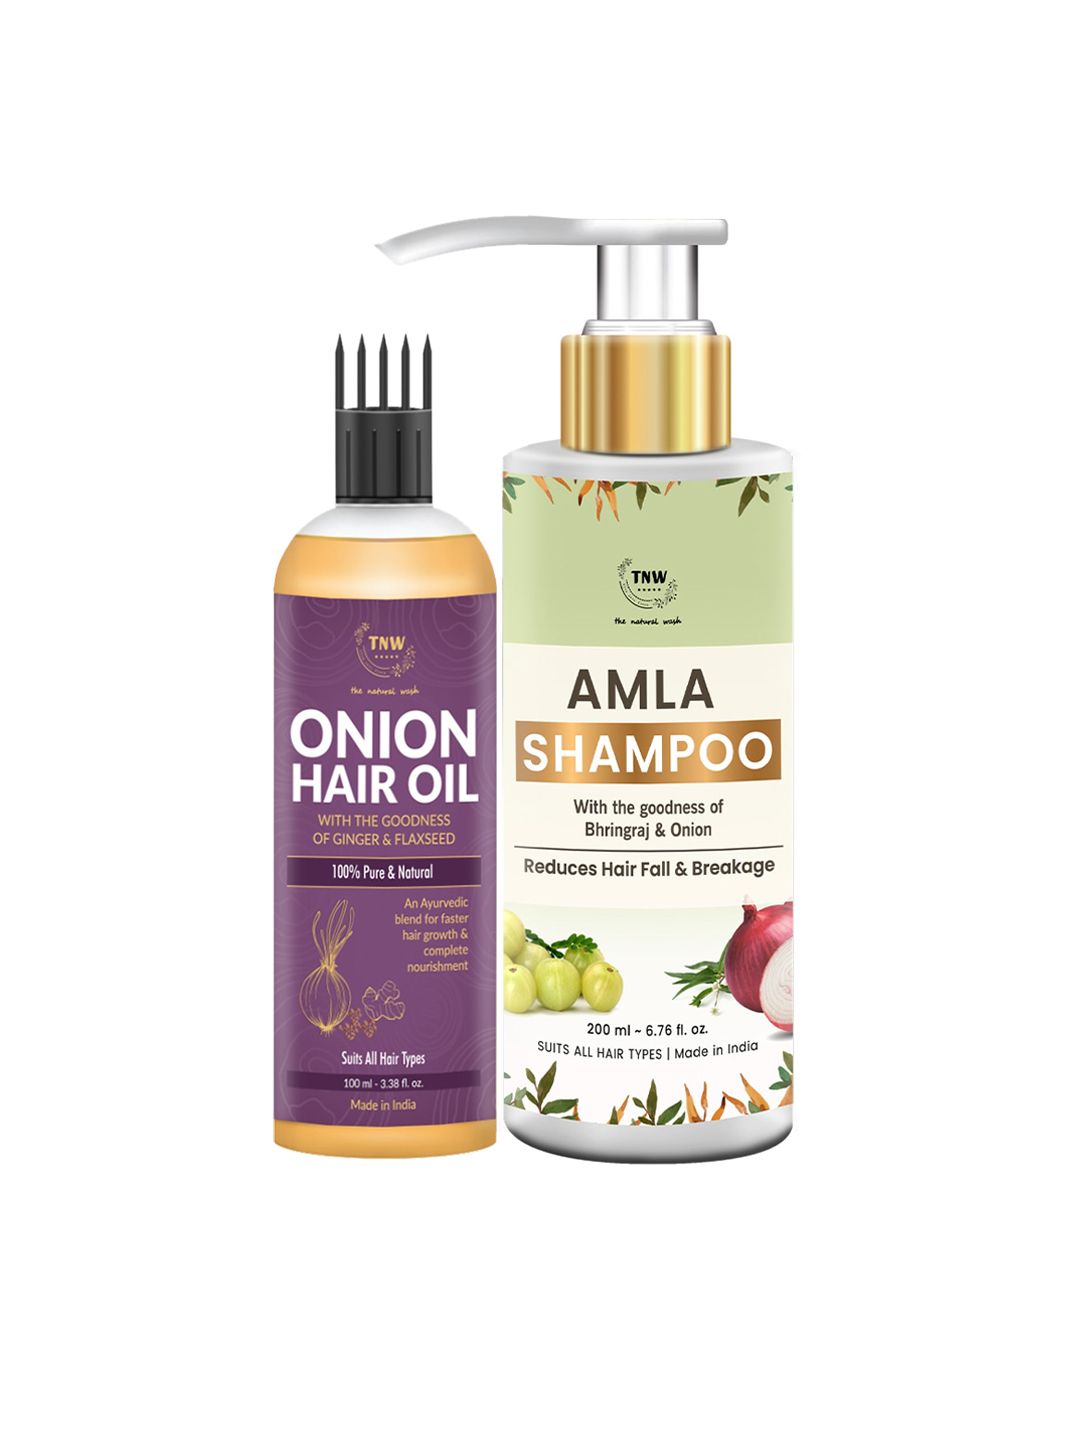 TNW the natural wash Pack of Amla Shampoo and Onion Hair Oil for Strong and Healthy Hair Price in India